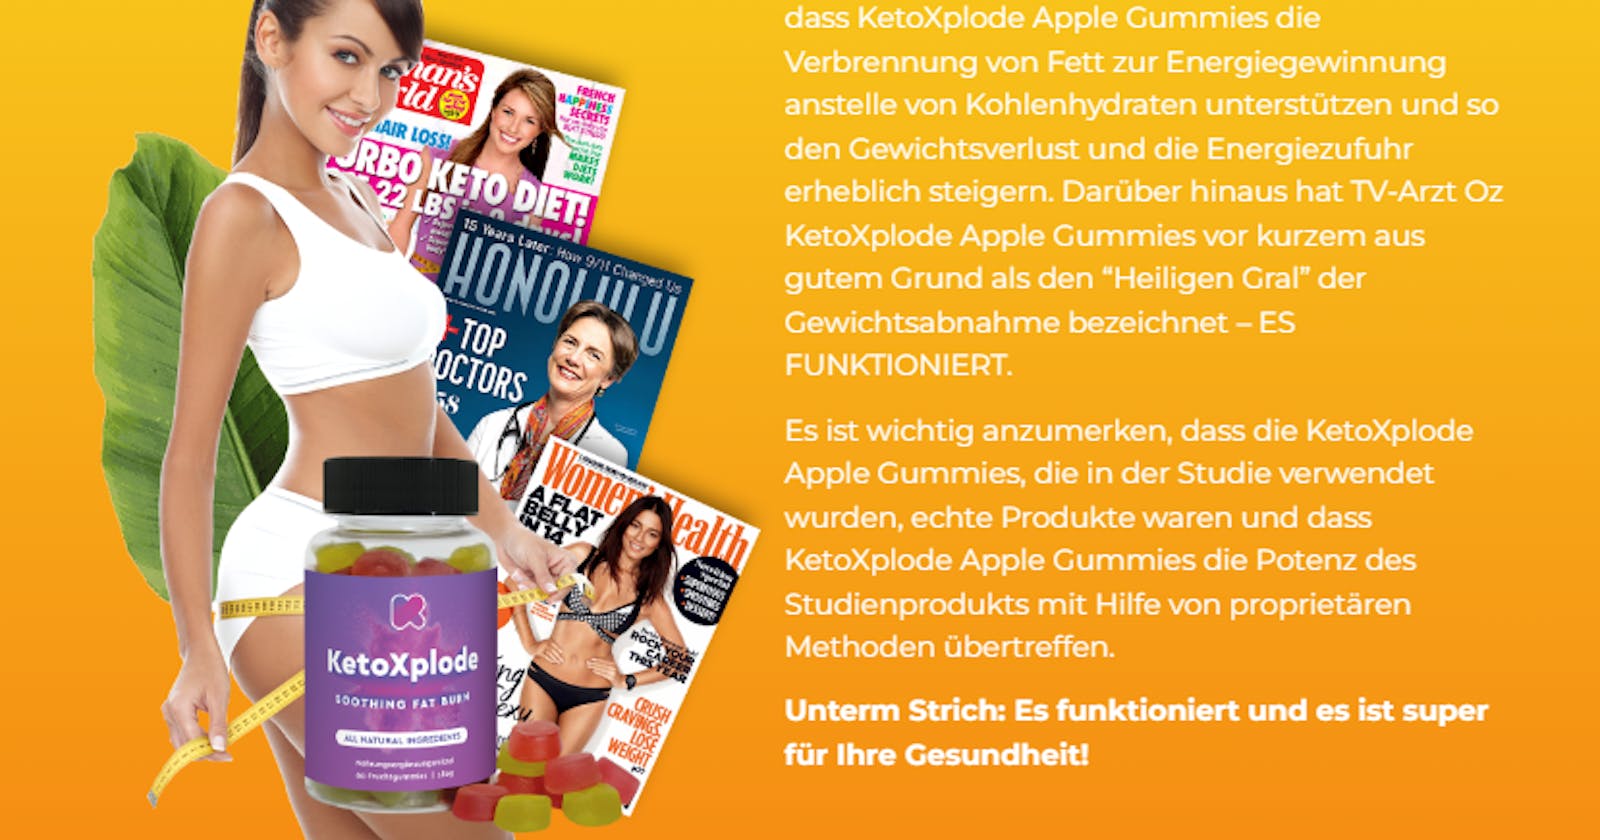 Keto Xplode Apple Gummies Germany Reviews For Weight Loss?